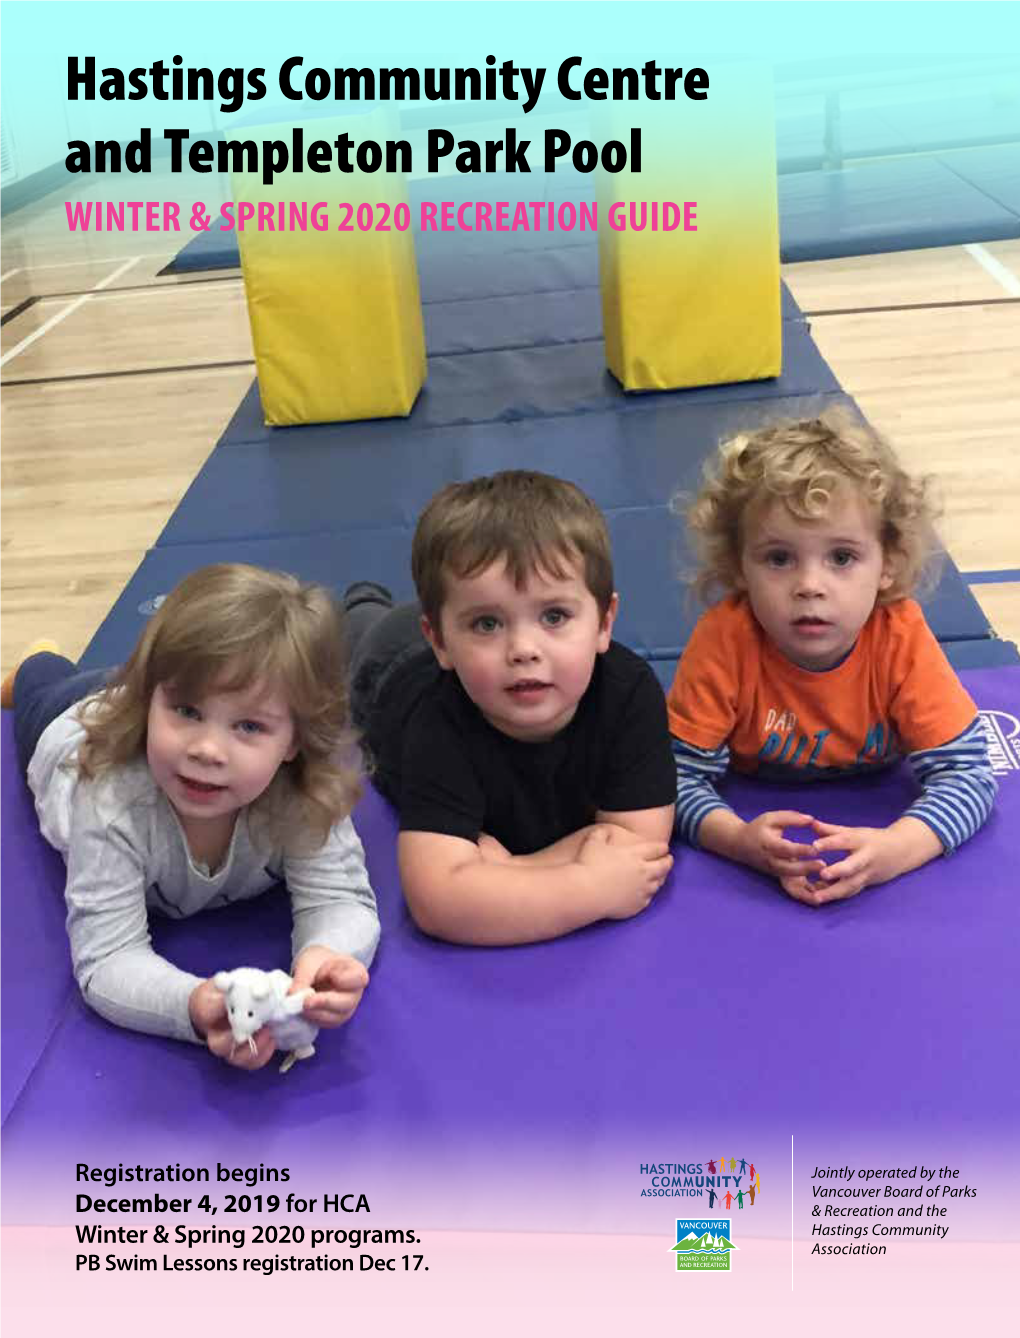 Hastings Community Centre and Templeton Park Pool WINTER & SPRING 2020 RECREATION GUIDE